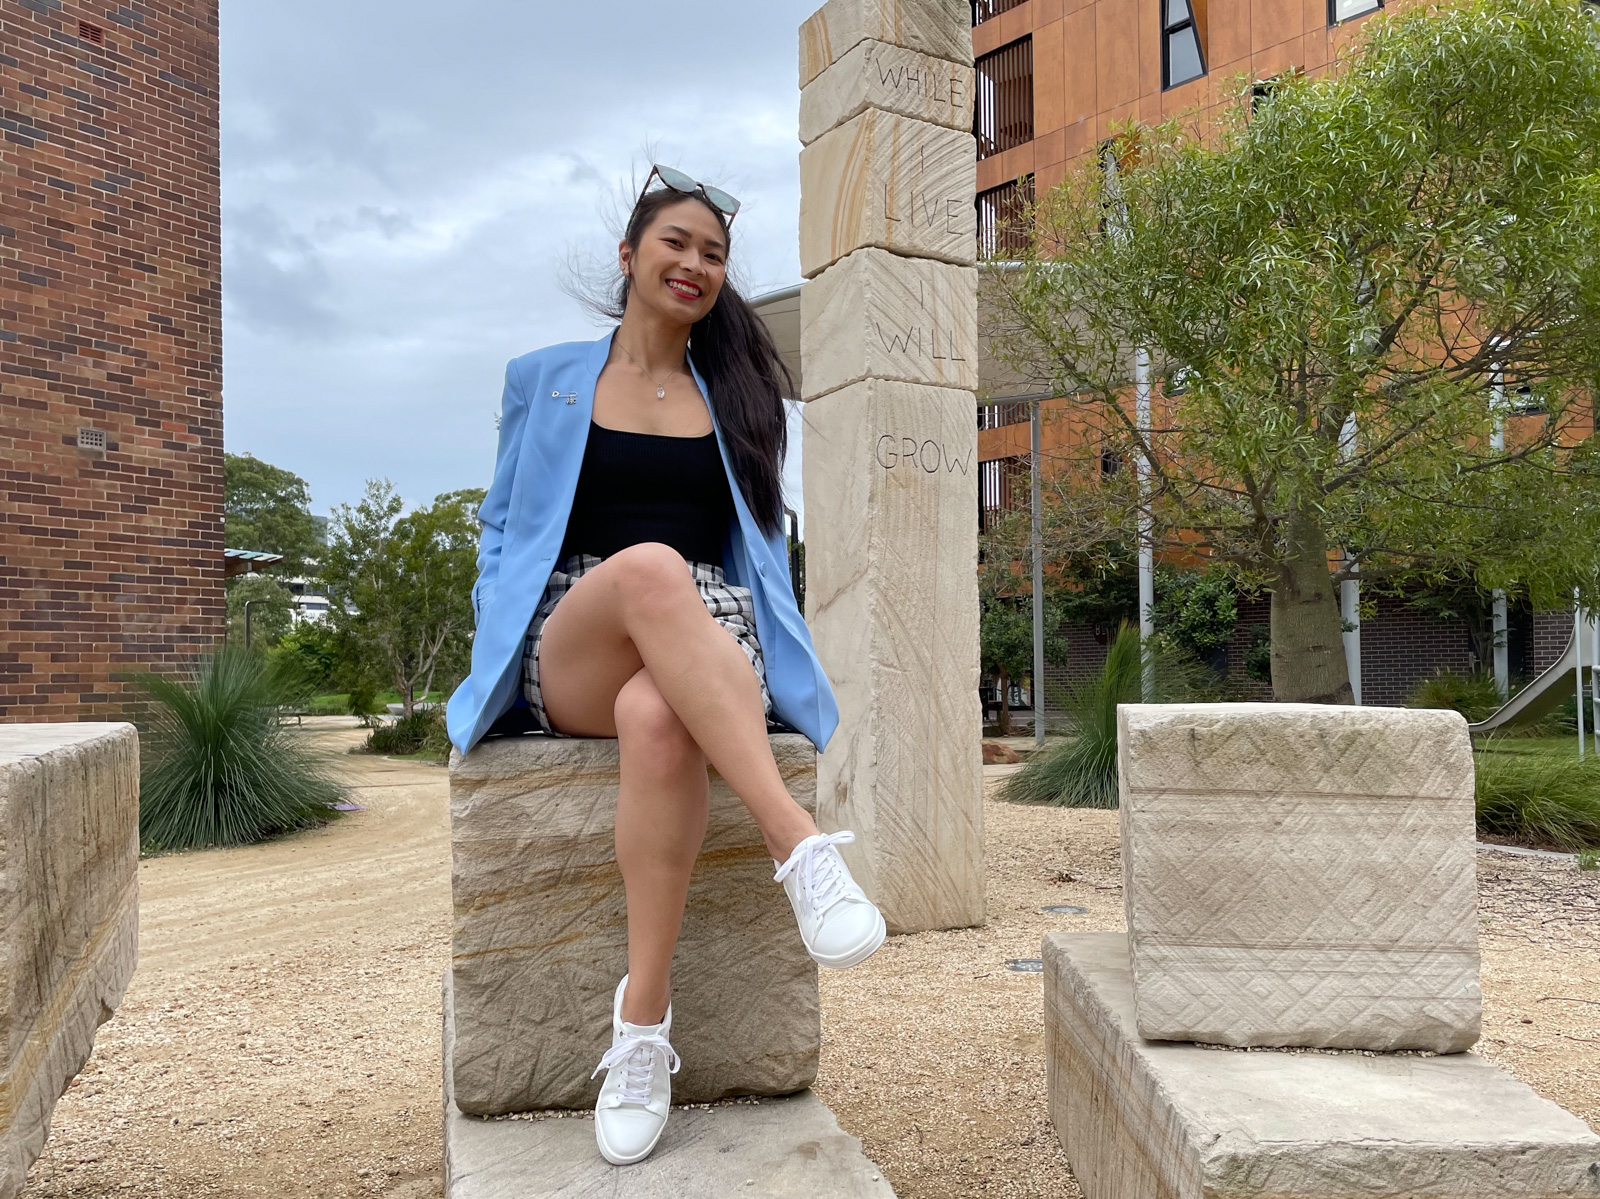 An Asian woman with long dark hair tied in a ponytail. She is wearing checkered shorts and a blue blazer. She is sitting on a giant stone step, next to a pillar carved with â€œWhile I live, I will growâ€�.